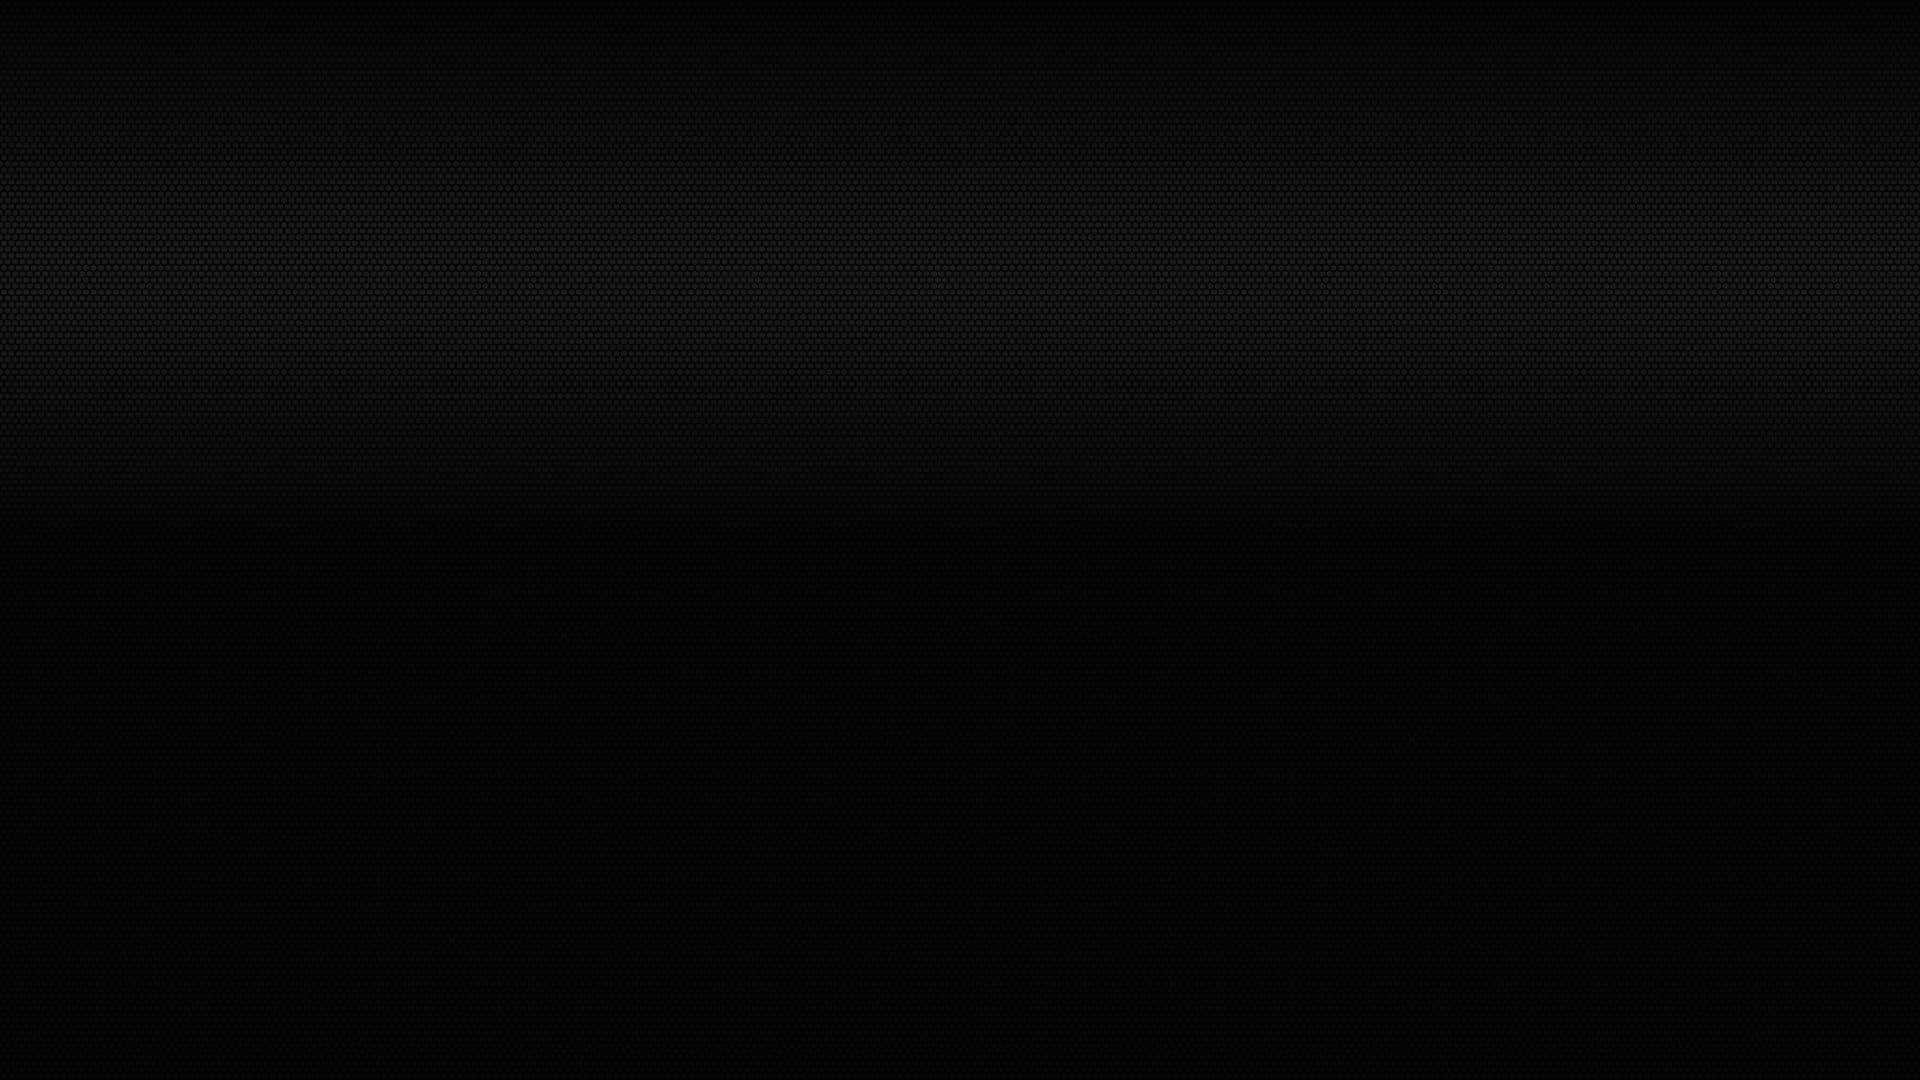 A sleek and stylish black solid background